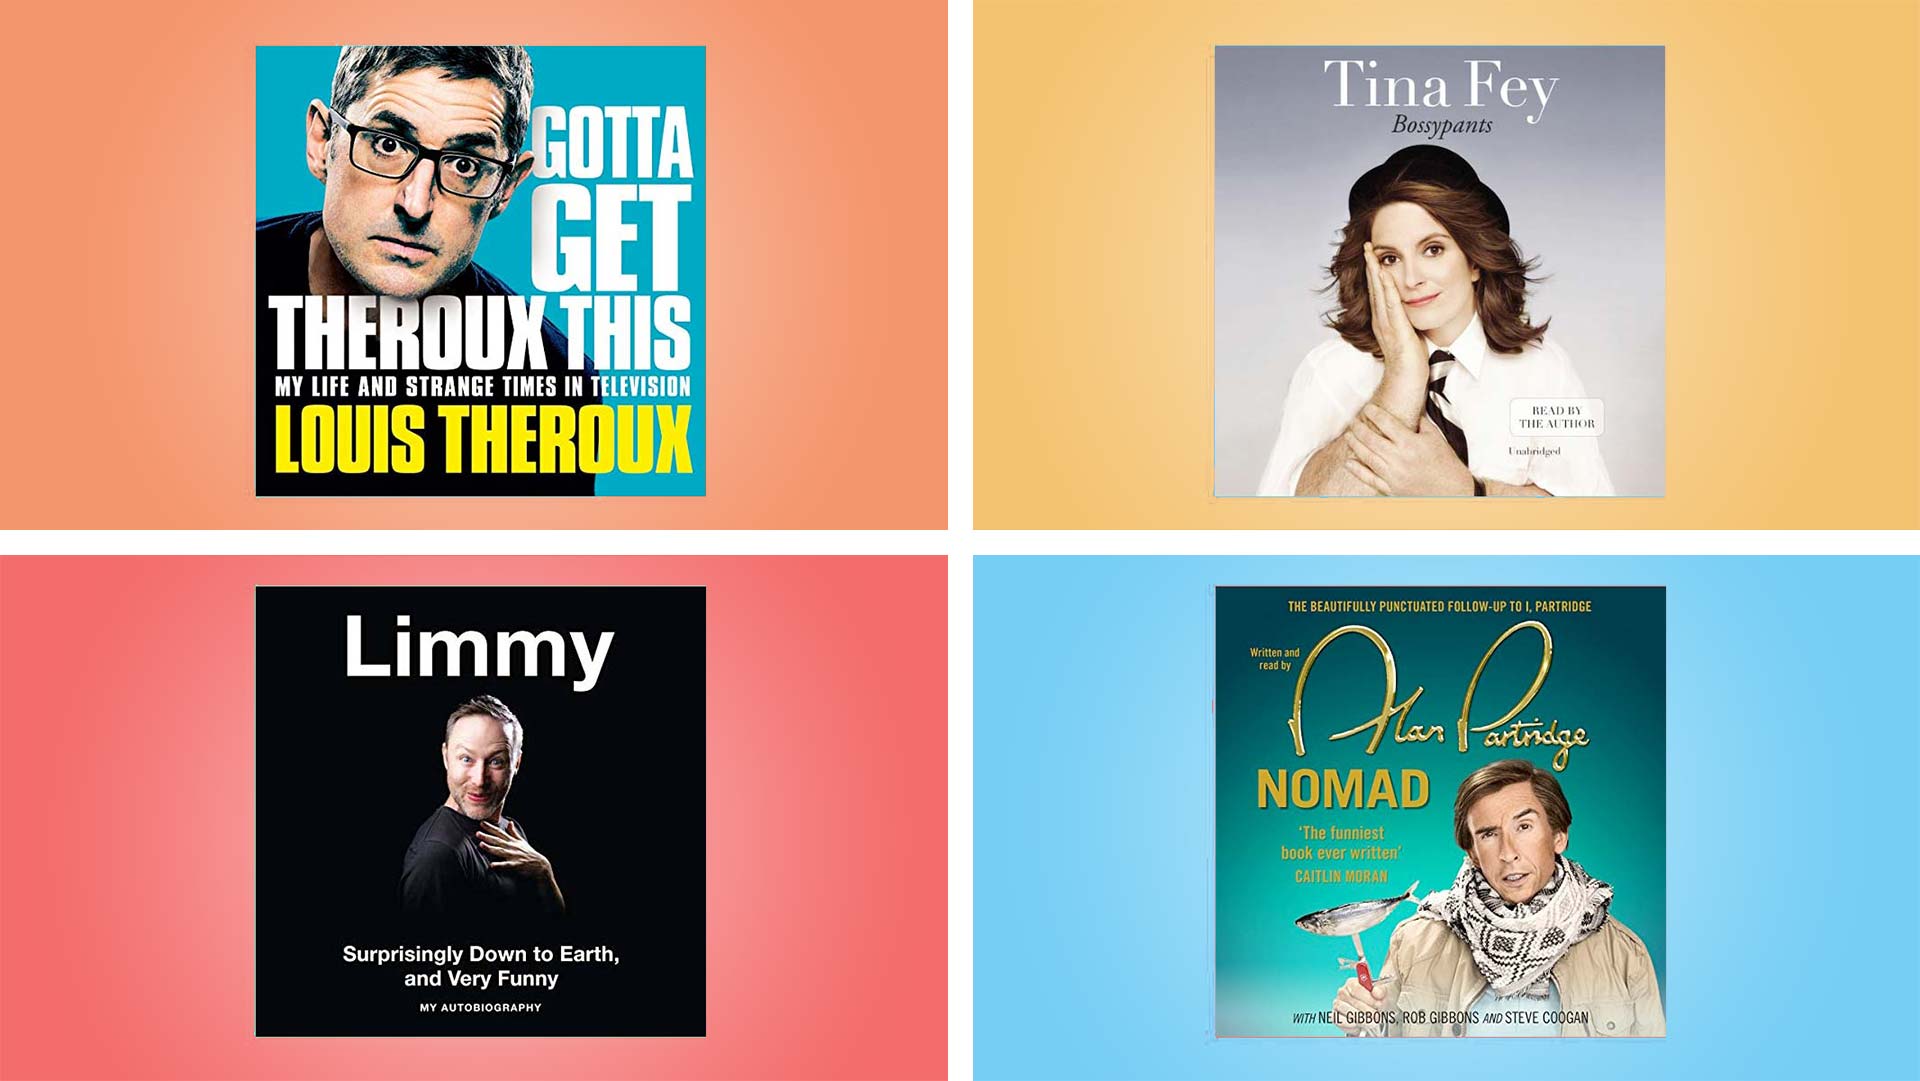 Best comedy audiobooks: 9 funny stories to listen to